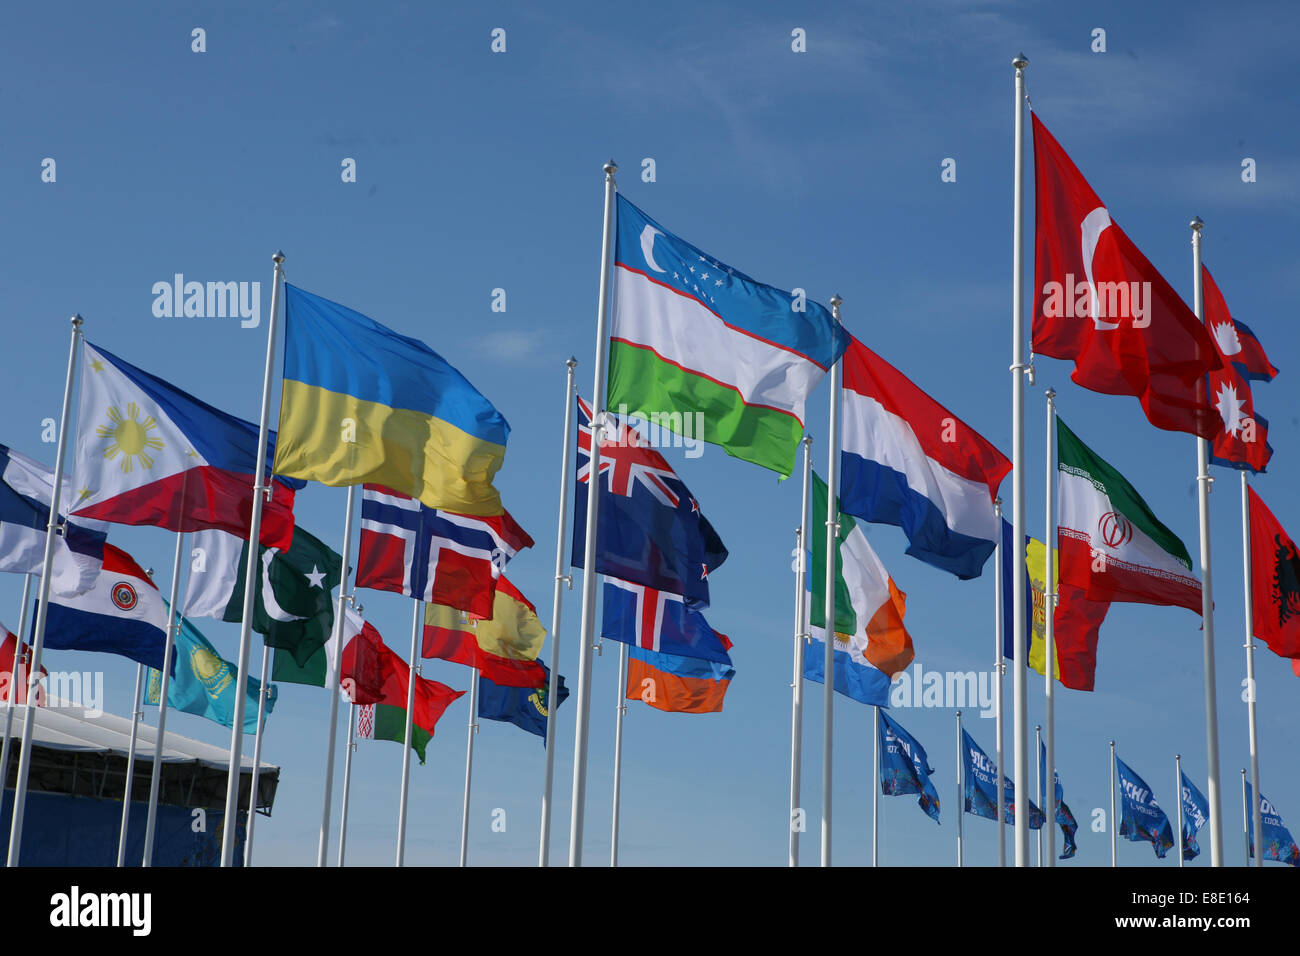 Many Flags blowing in the wind Stock Photo